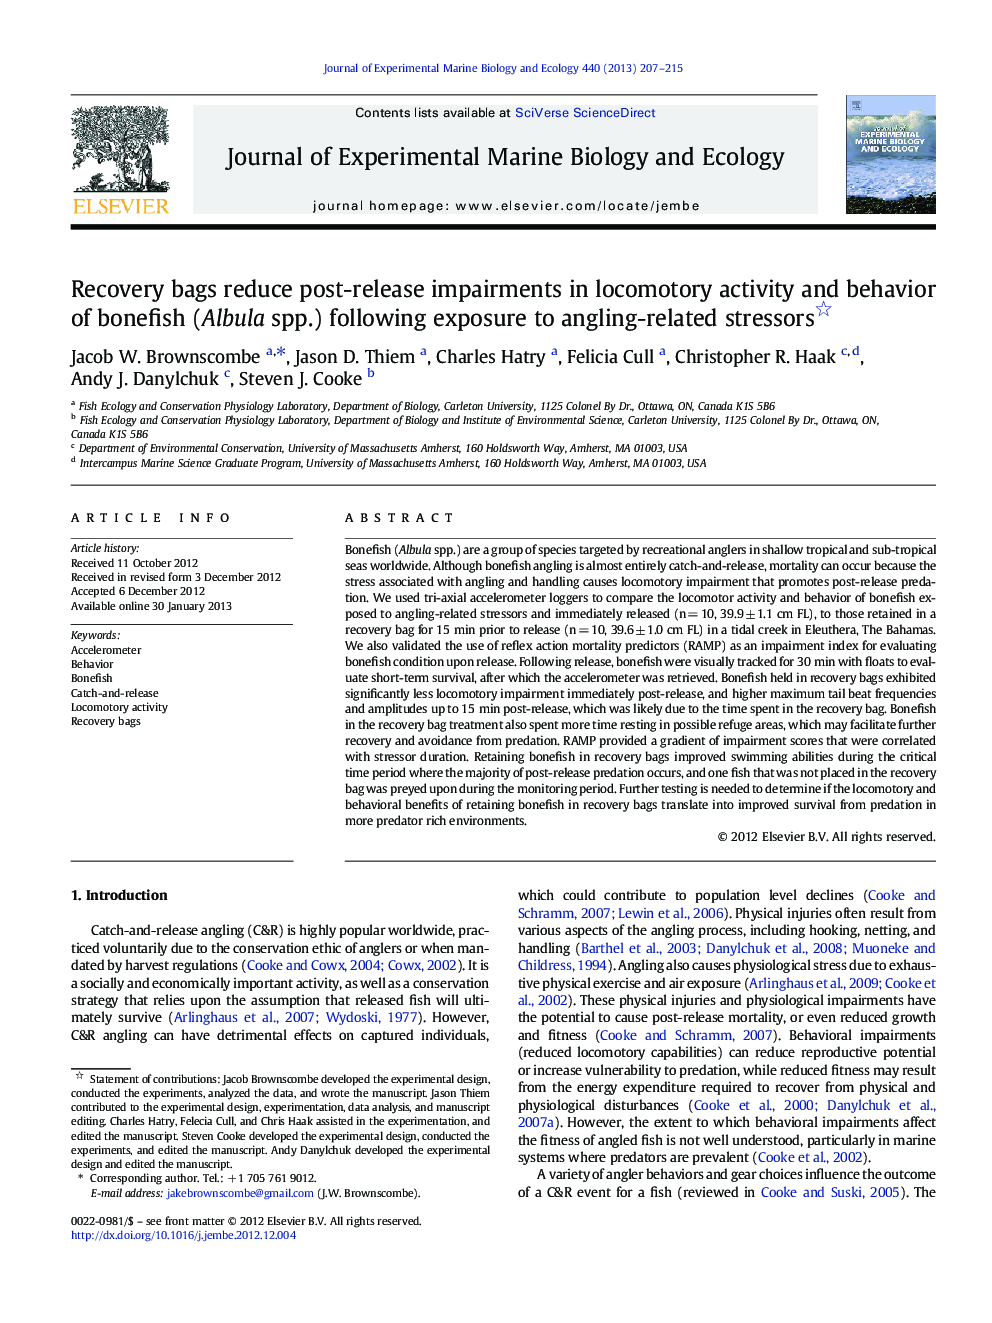 Recovery bags reduce post-release impairments in locomotory activity and behavior of bonefish (Albula spp.) following exposure to angling-related stressors 